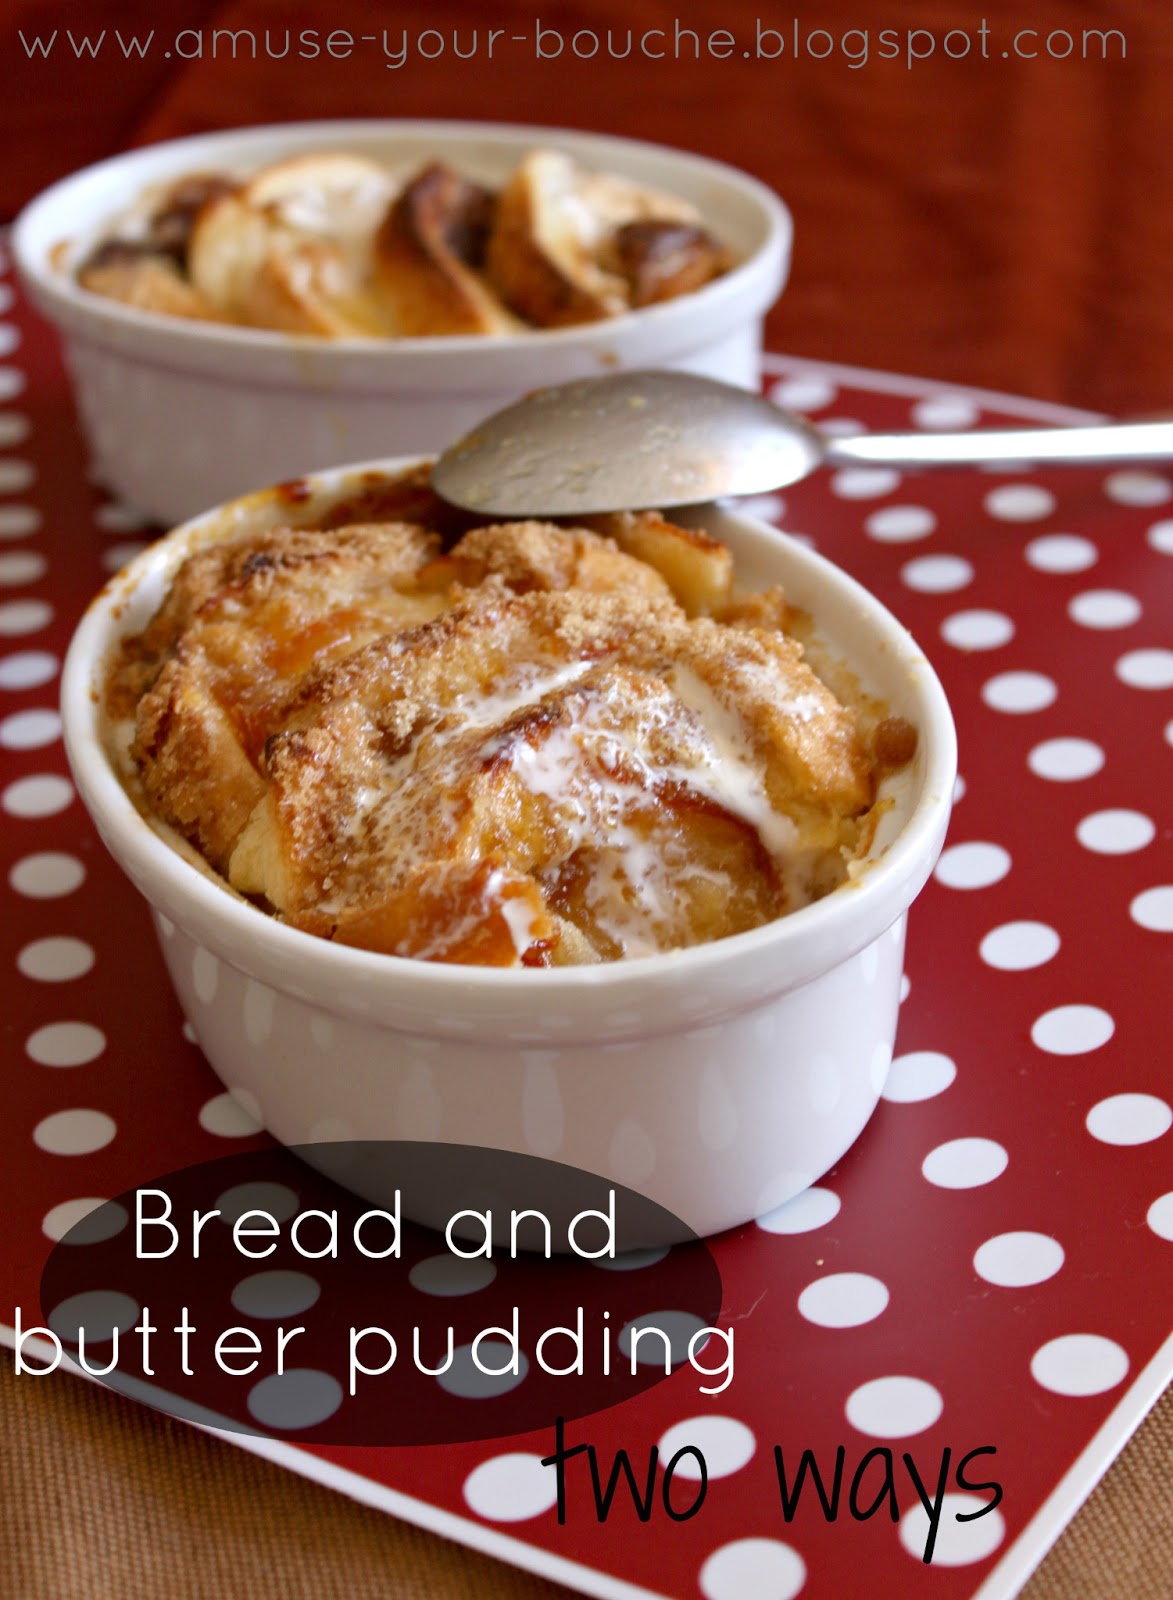 Bread and butter pudding - two ways - Amuse Your Bouche